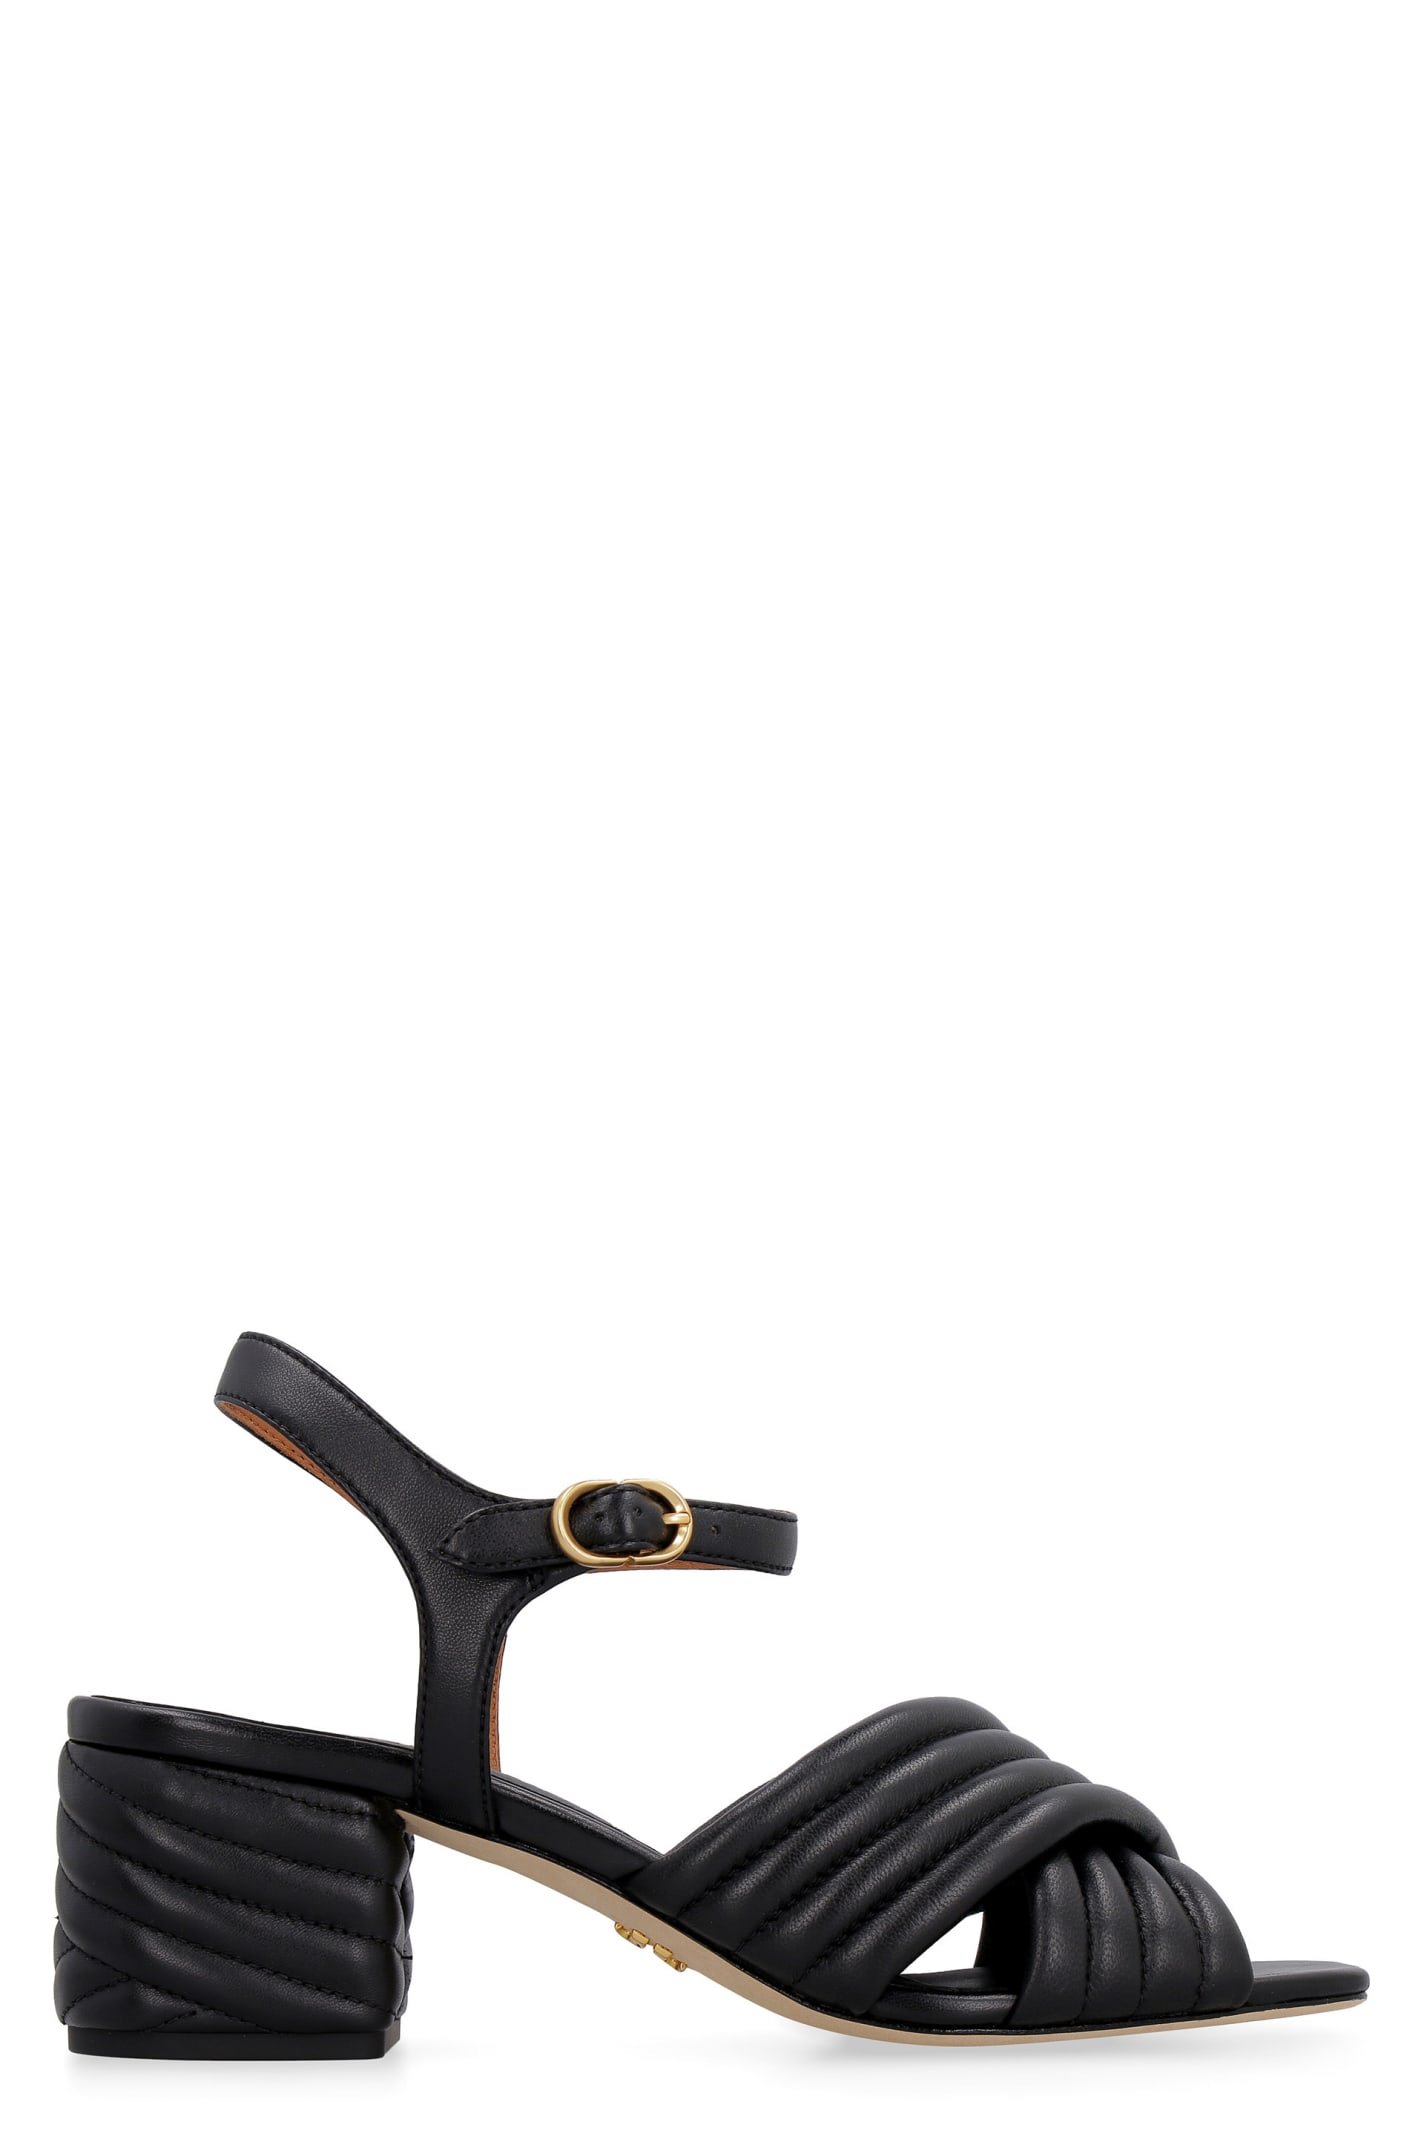 Buy Tory Burch Kira Leather Sandals online, shop Tory Burch shoes with free shipping